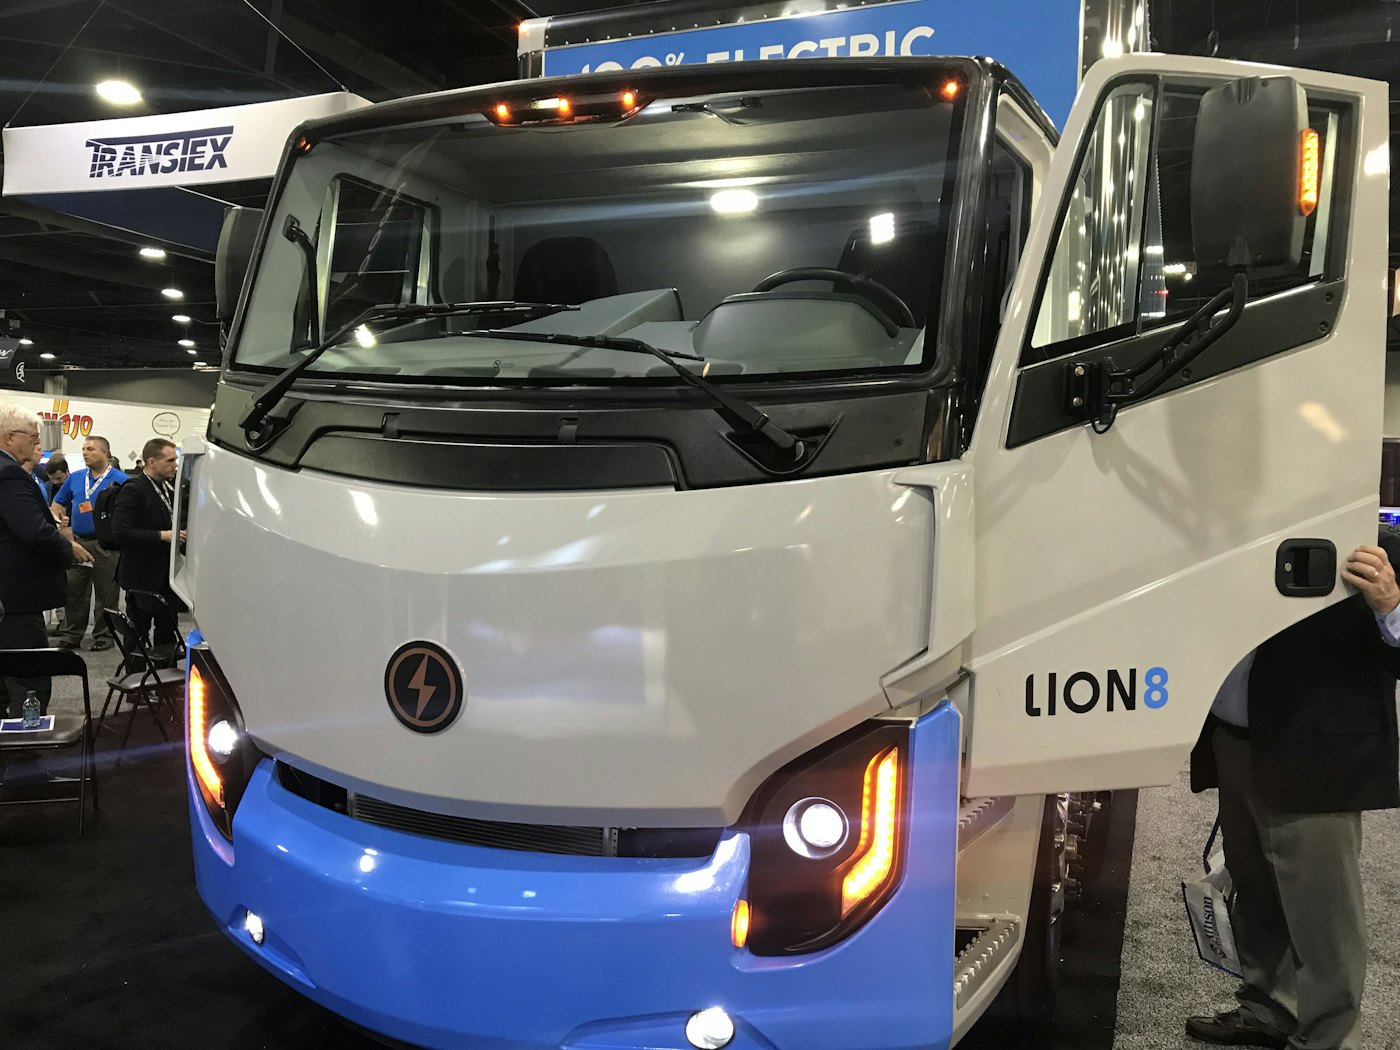 Lion Class 8 electric truck makes debut in the U.S. Commercial